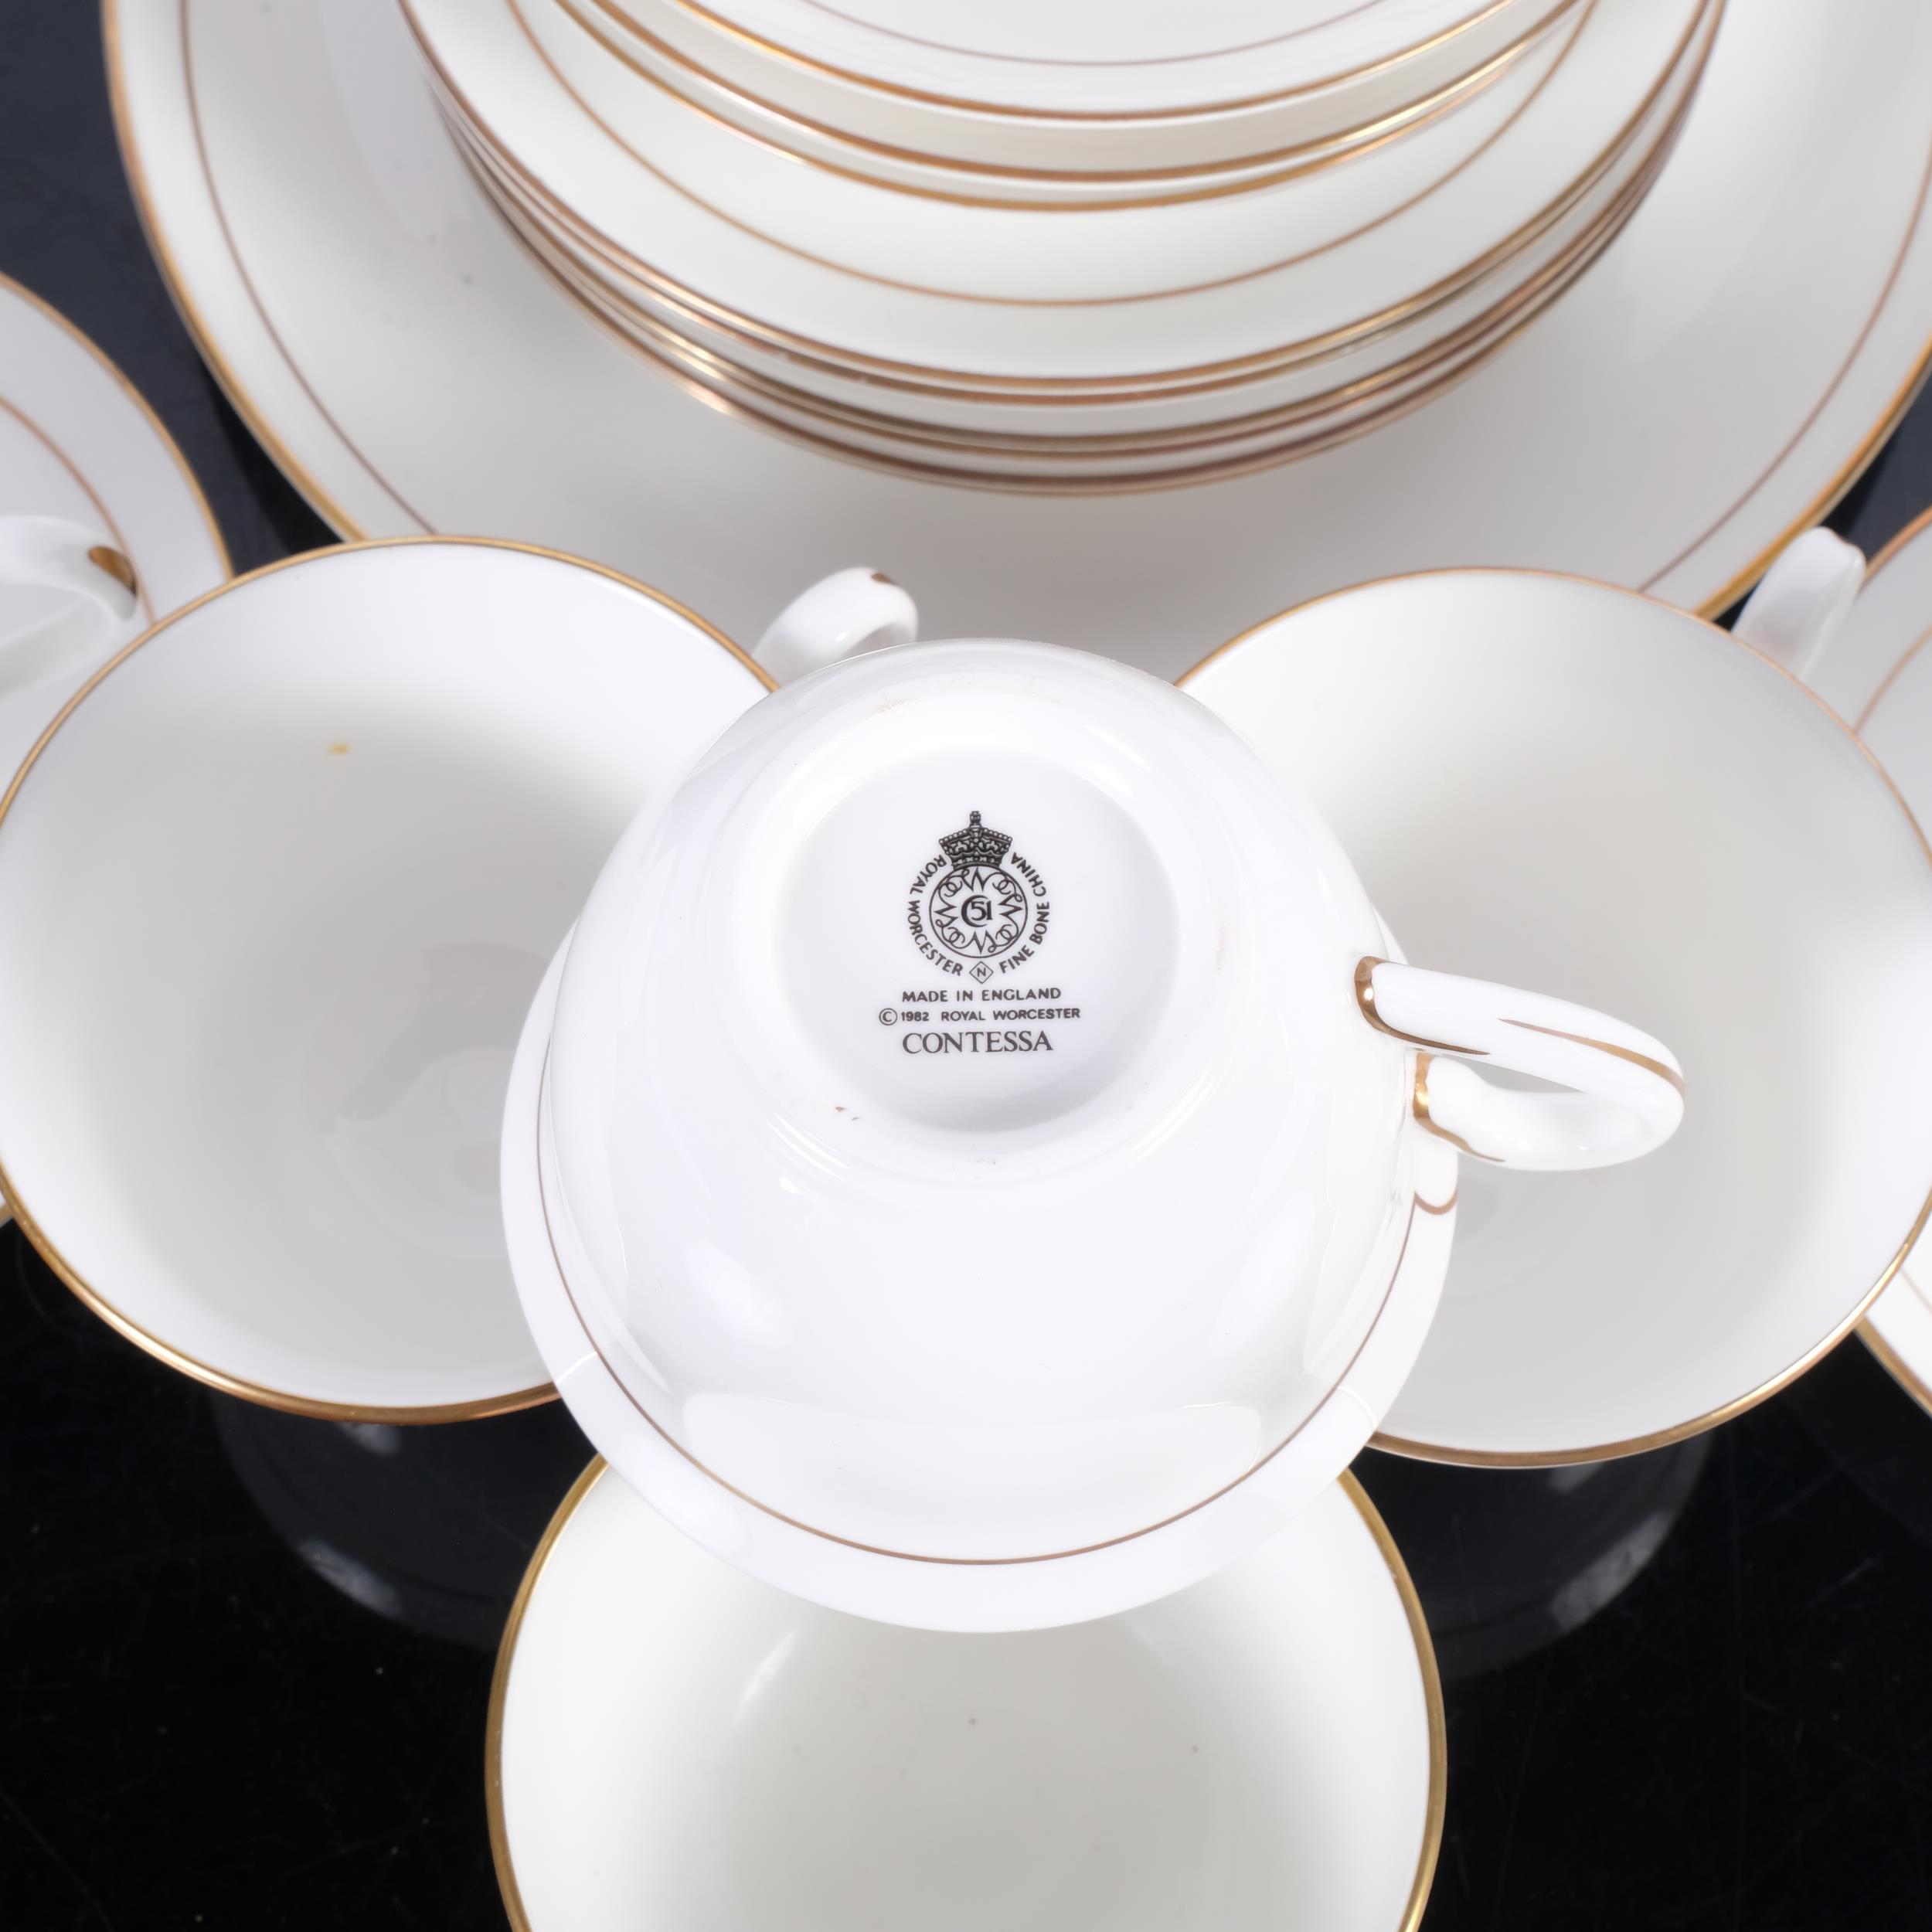 A Royal Worcester Contessa tea set for 6 people (jug repaired) - Image 2 of 2